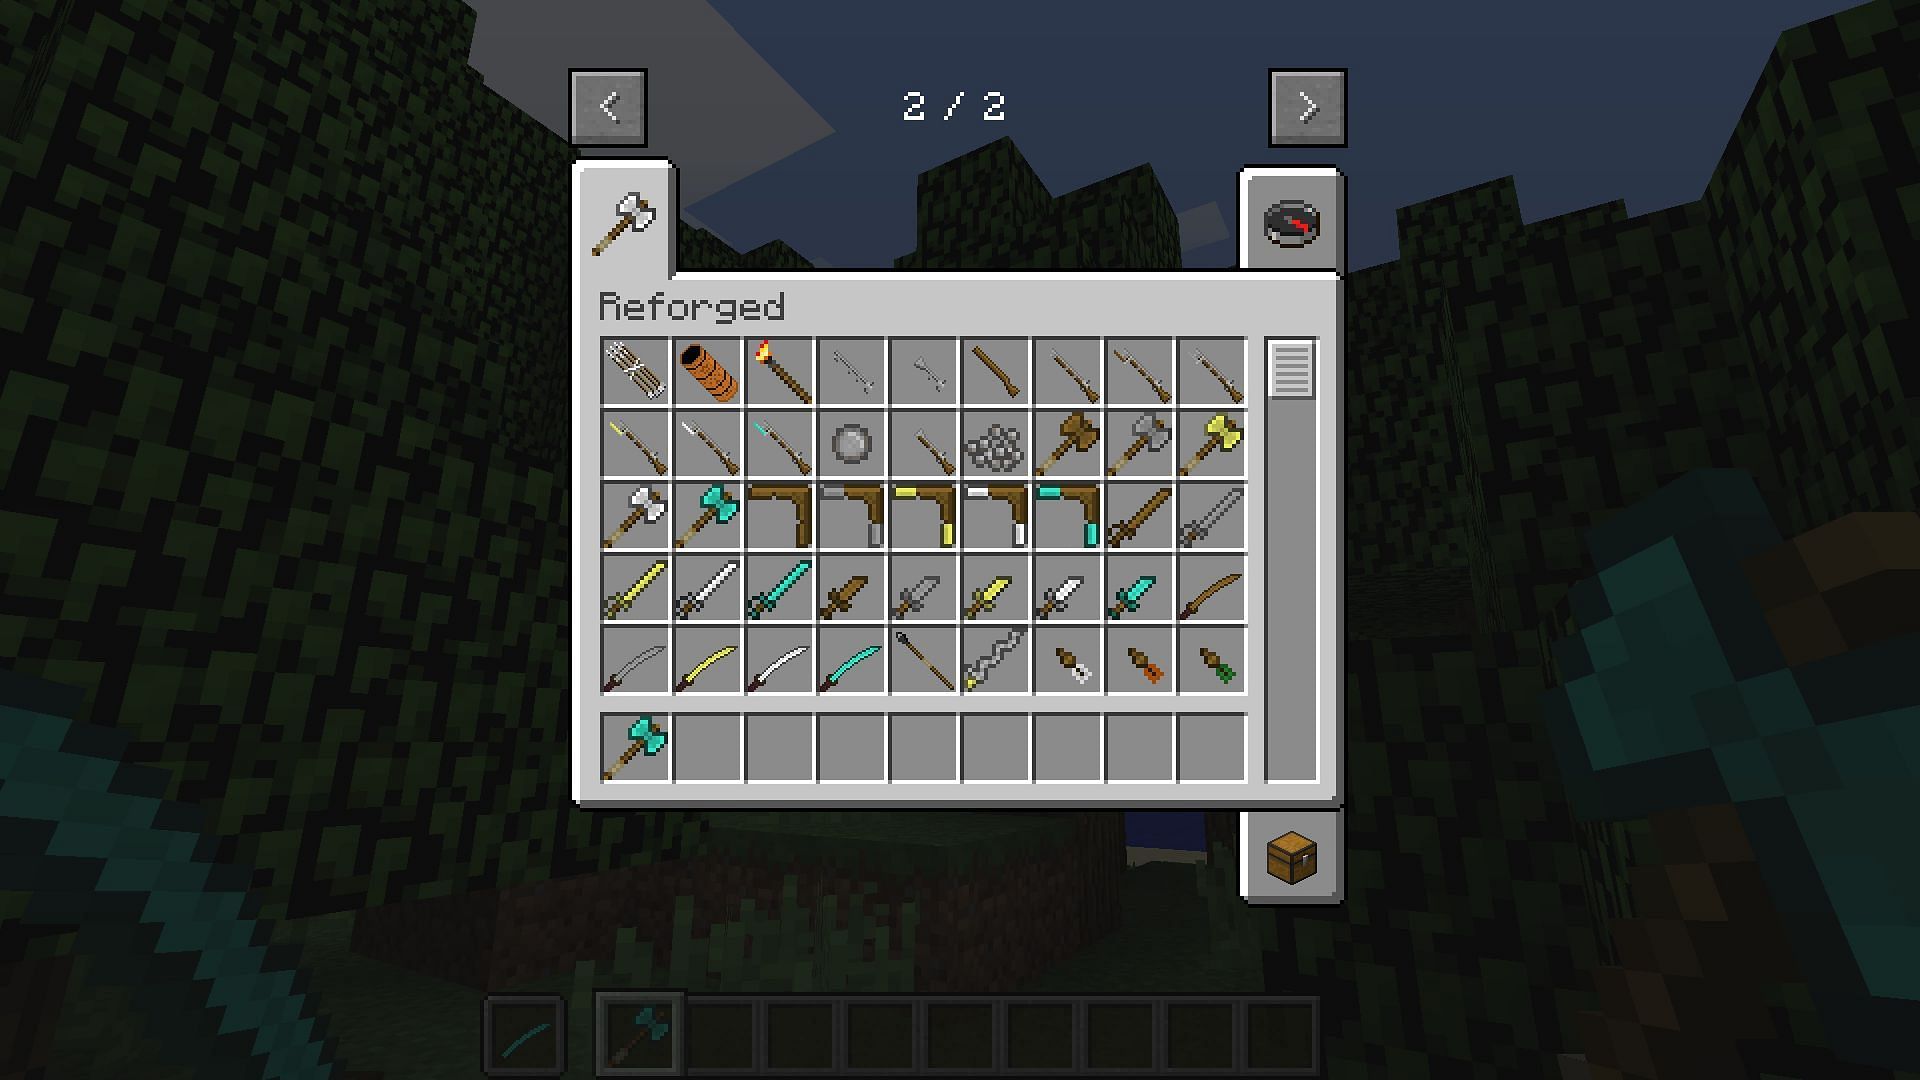 Weapons in reforged mod (Image via Mojang)